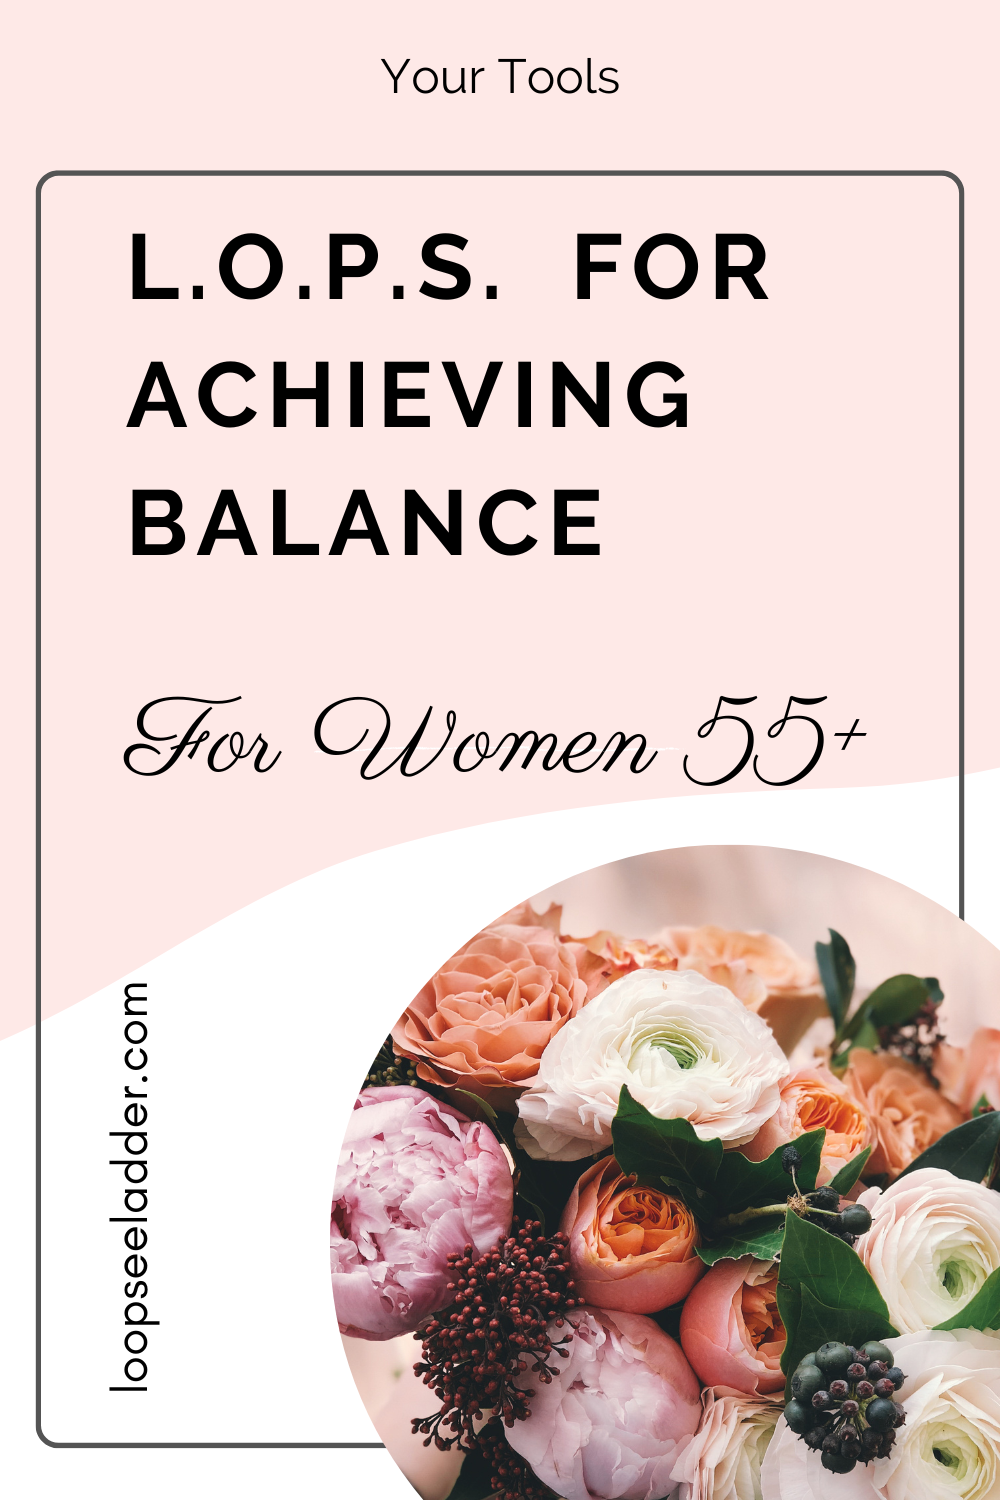 L.O.P.S. - A Framework Women 55+ Will Use to Achieve Balance in Their LIfe